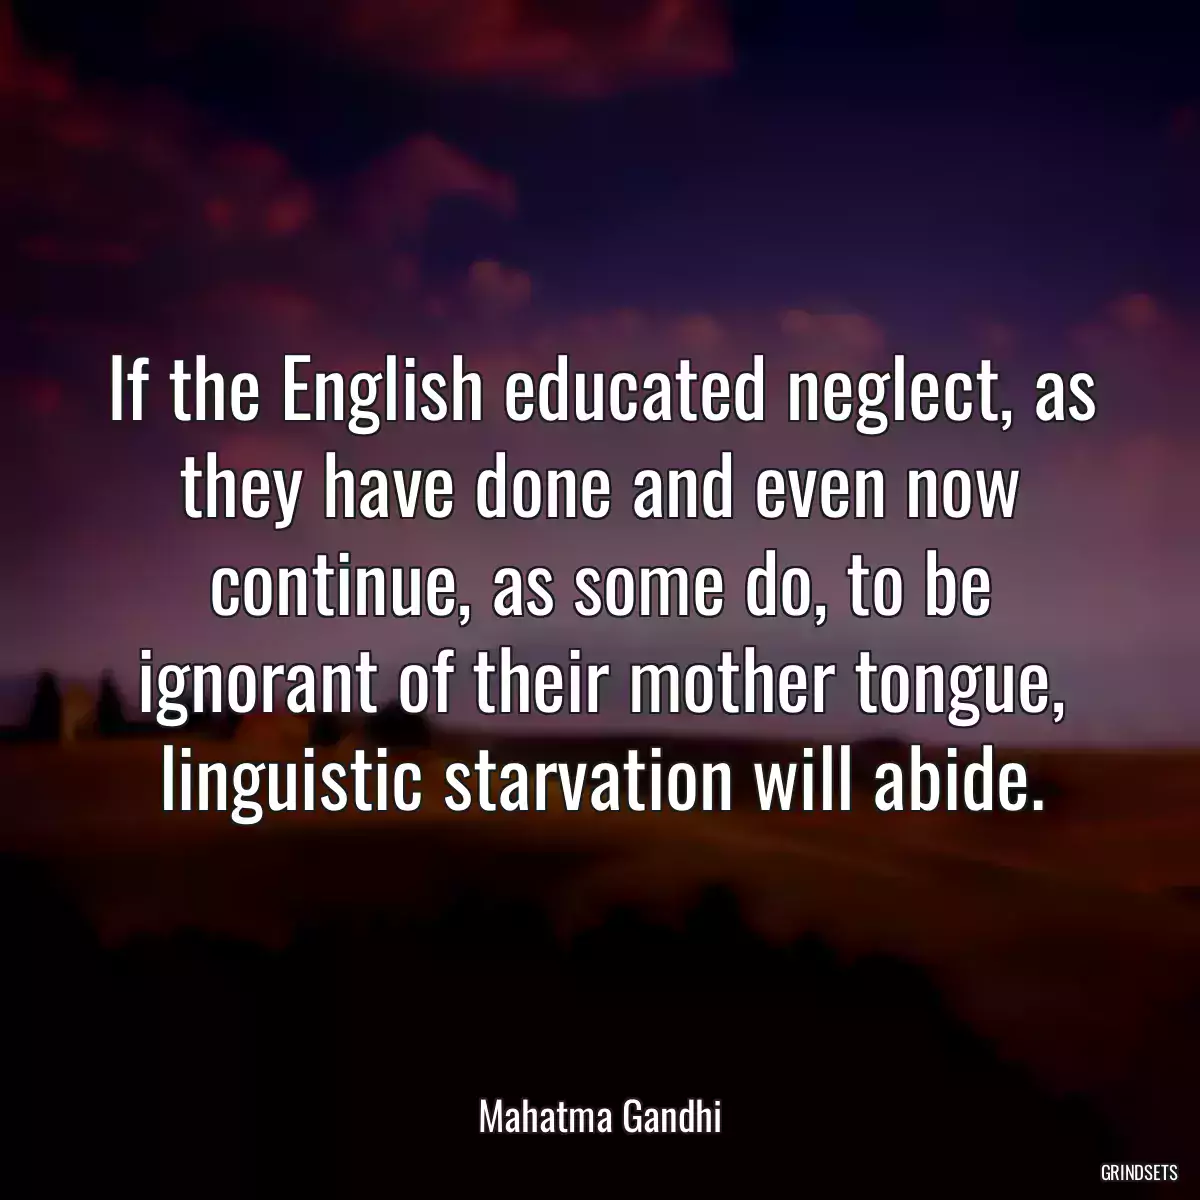 If the English educated neglect, as they have done and even now continue, as some do, to be ignorant of their mother tongue, linguistic starvation will abide.